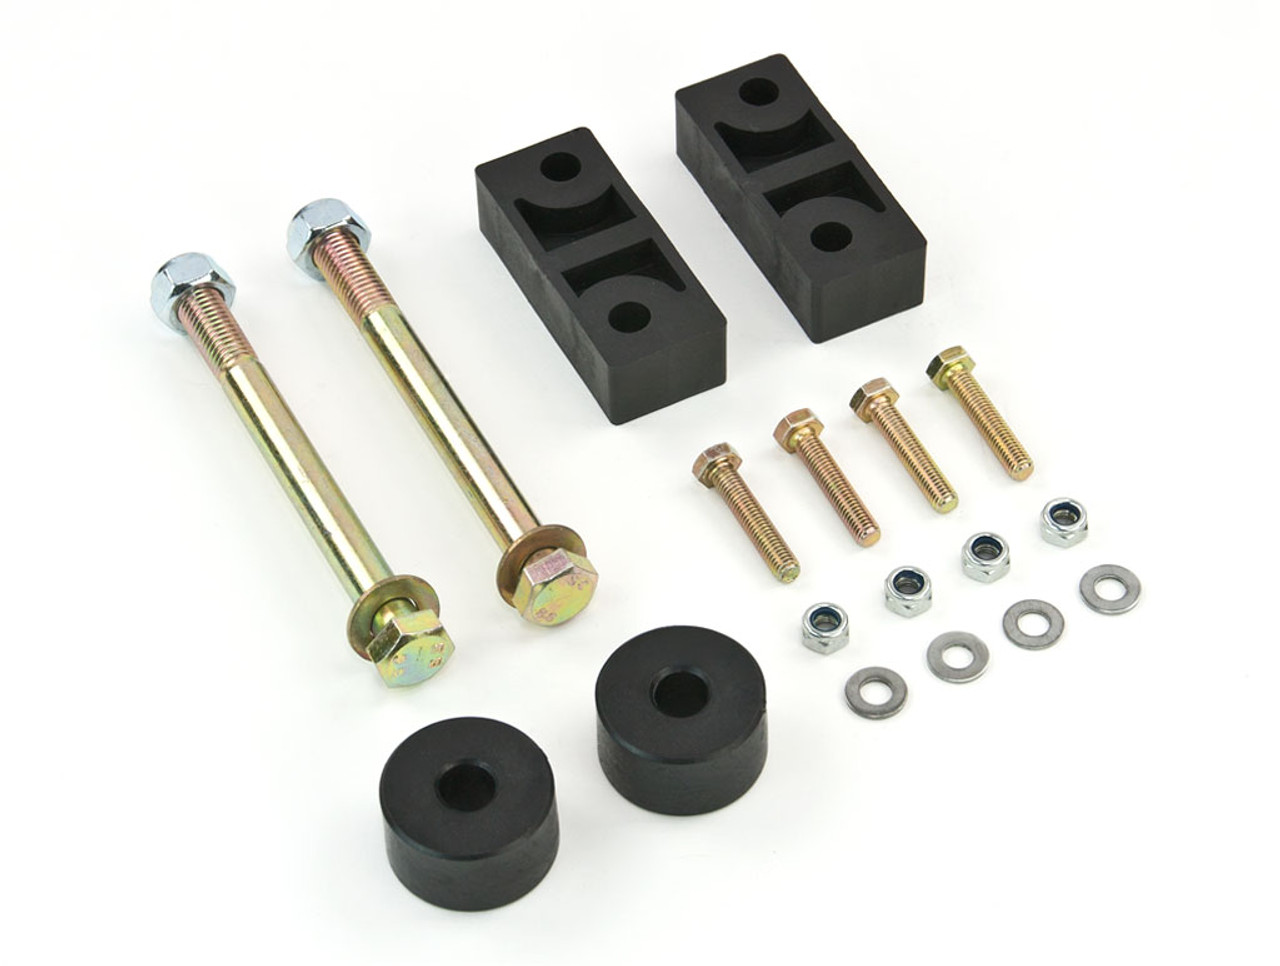 Sway Bar & Differential Drop Kit For 2-4" Lift Toyota 4-Runner 90-95 4WD